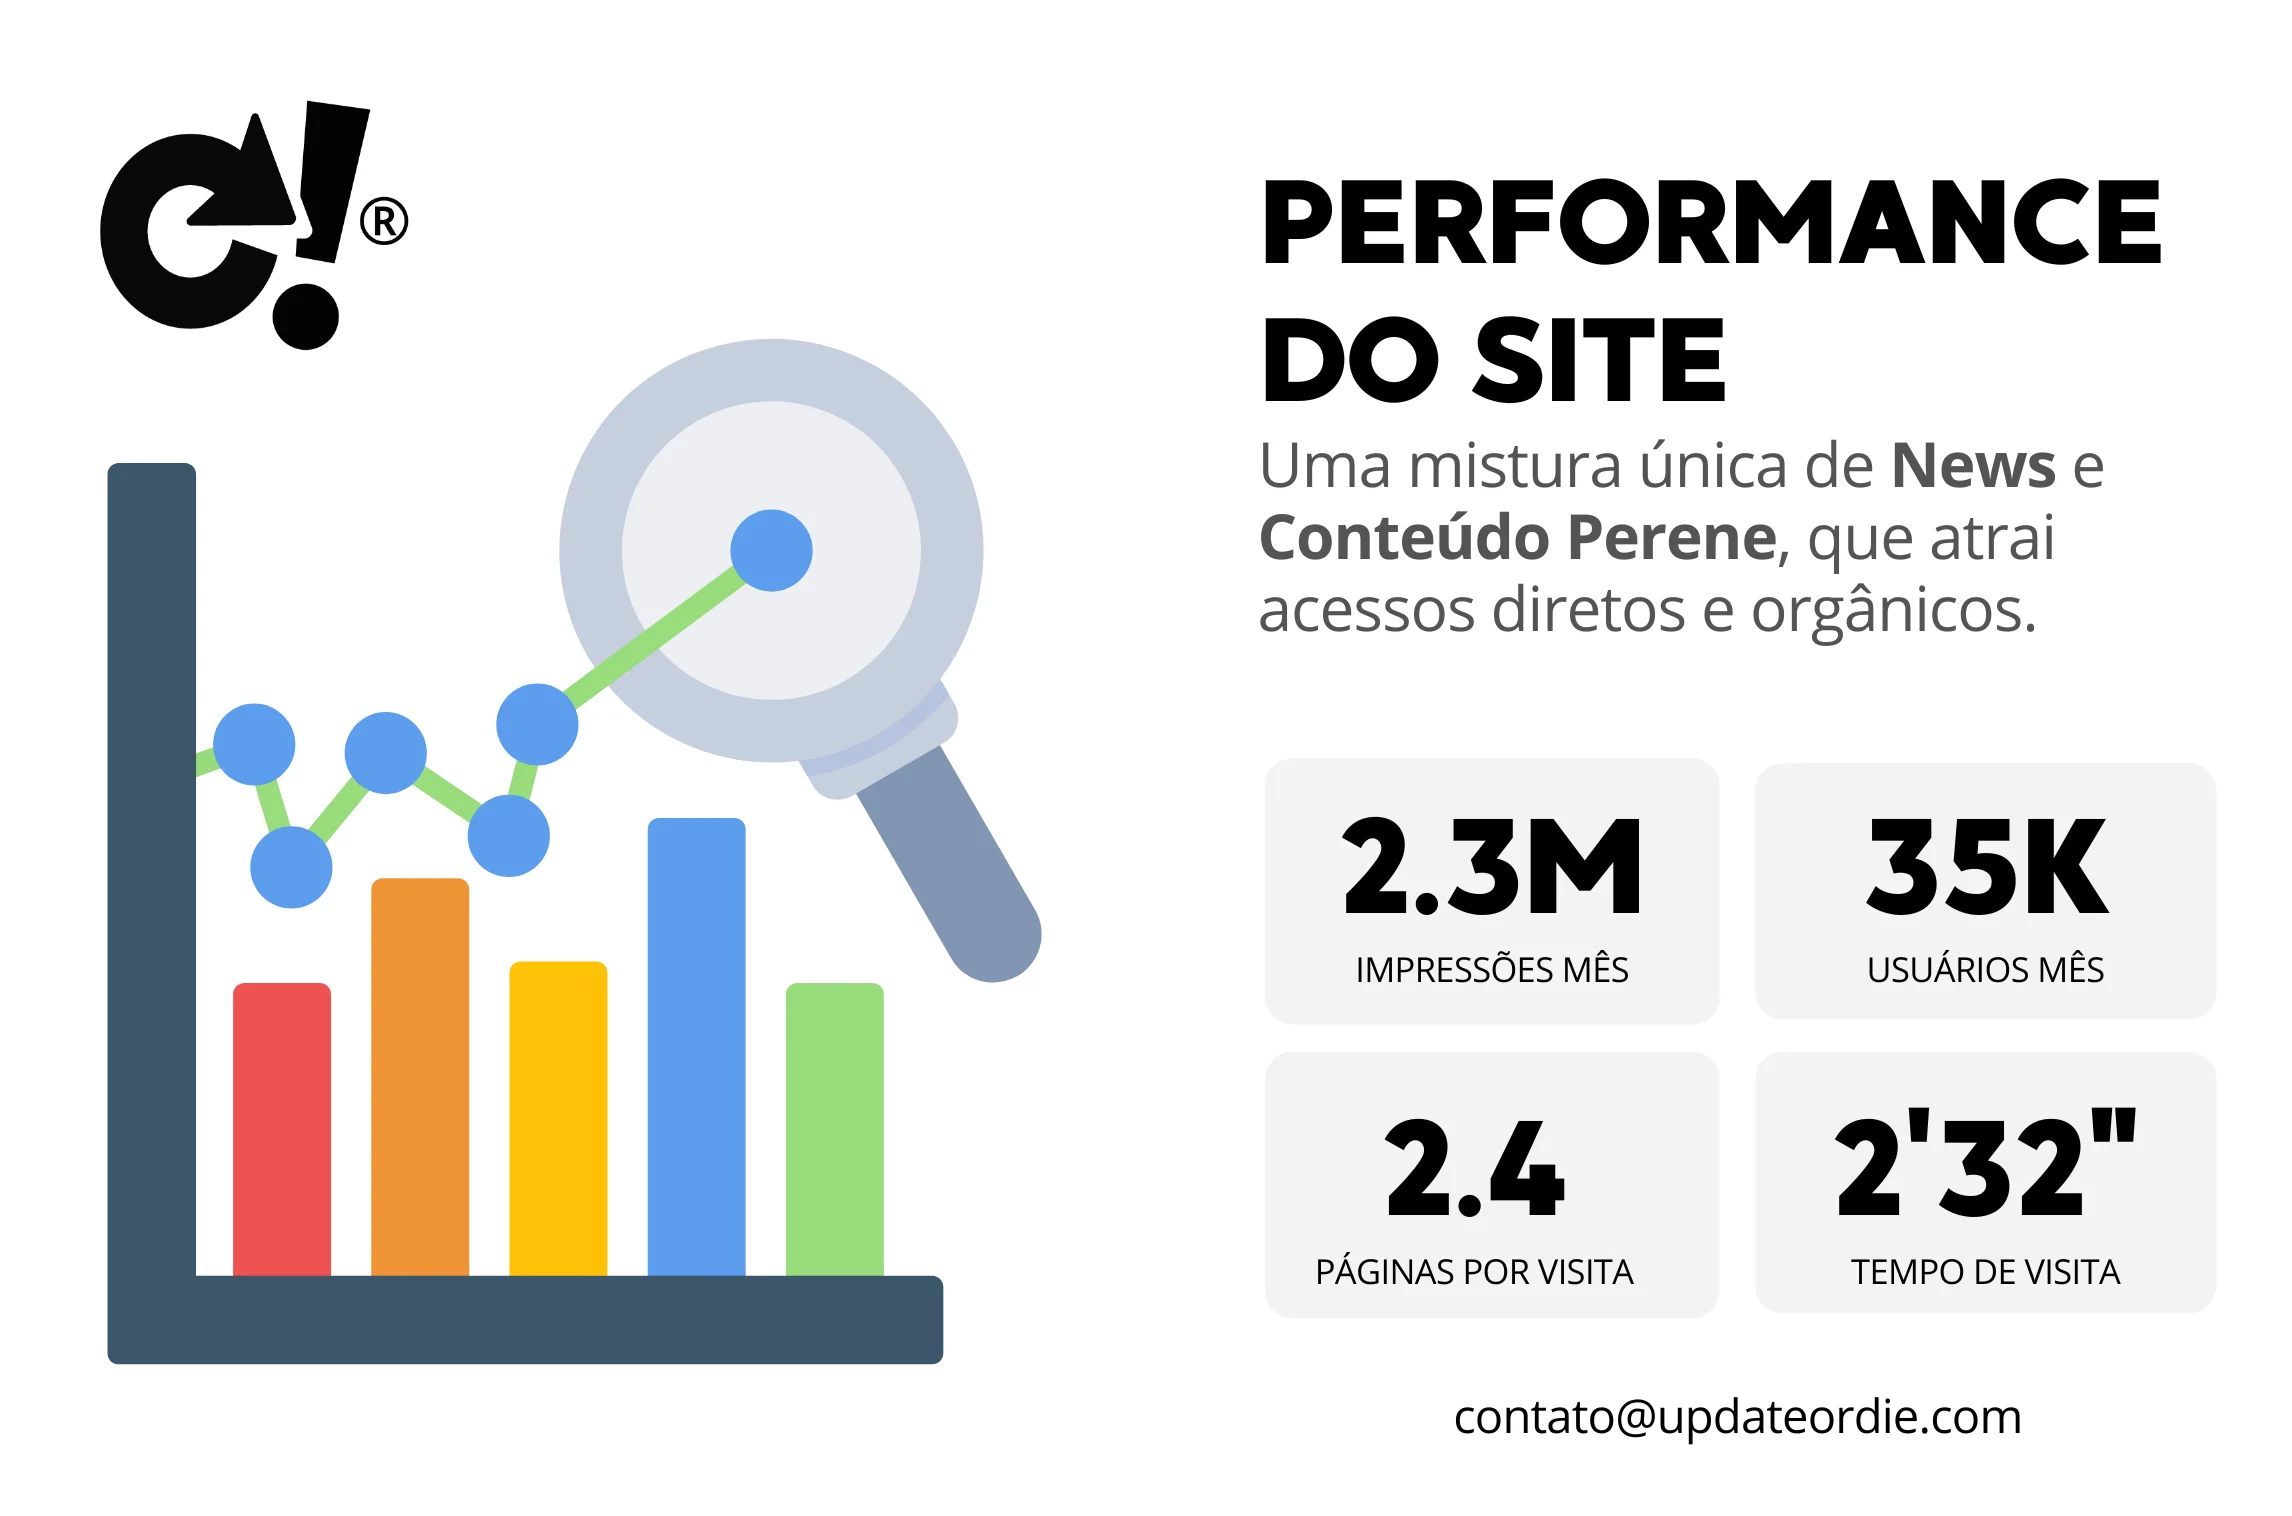 Infographic detailing website performance with bar graph, magnifying glass on growth chart, and key metrics including monthly impressions, users, pages per visit, and visit duration in Portuguese.